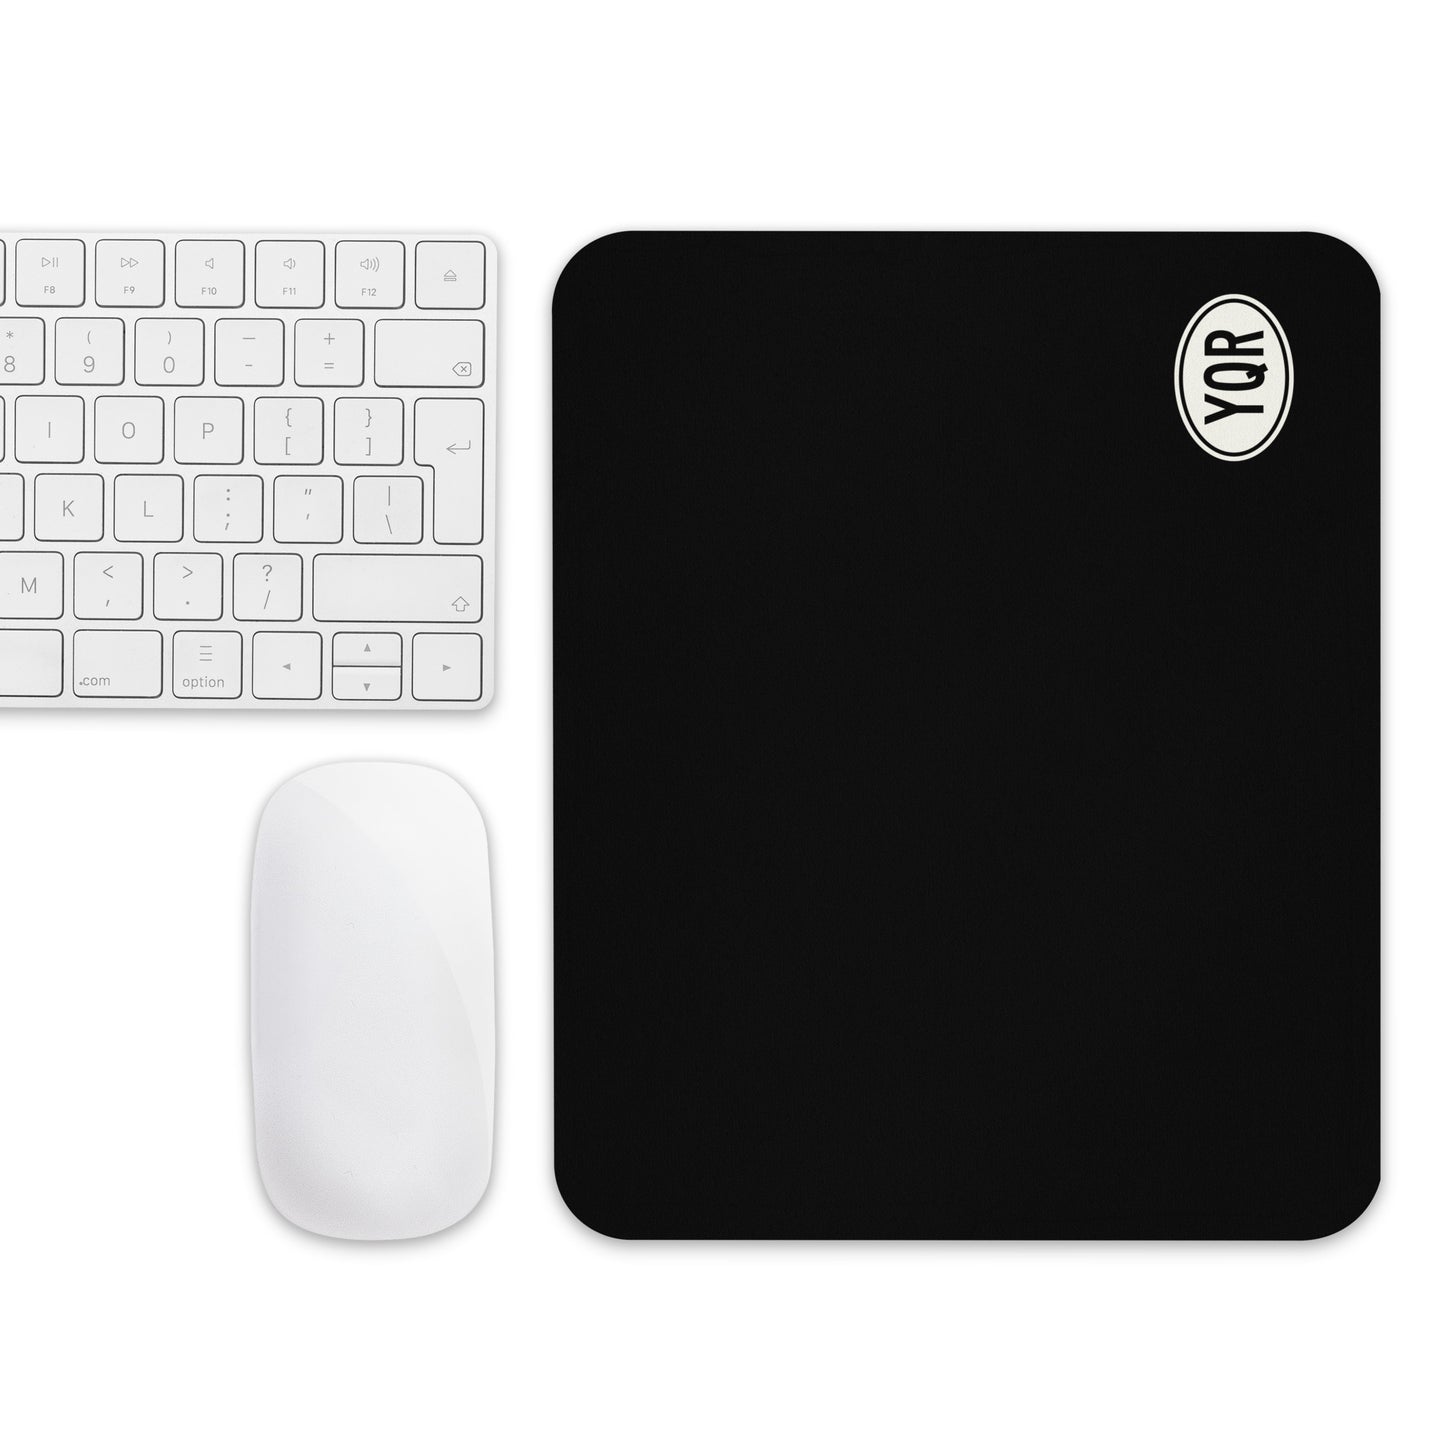 Unique Travel Gift Mouse Pad - White Oval • YQR Regina • YHM Designs - Image 04